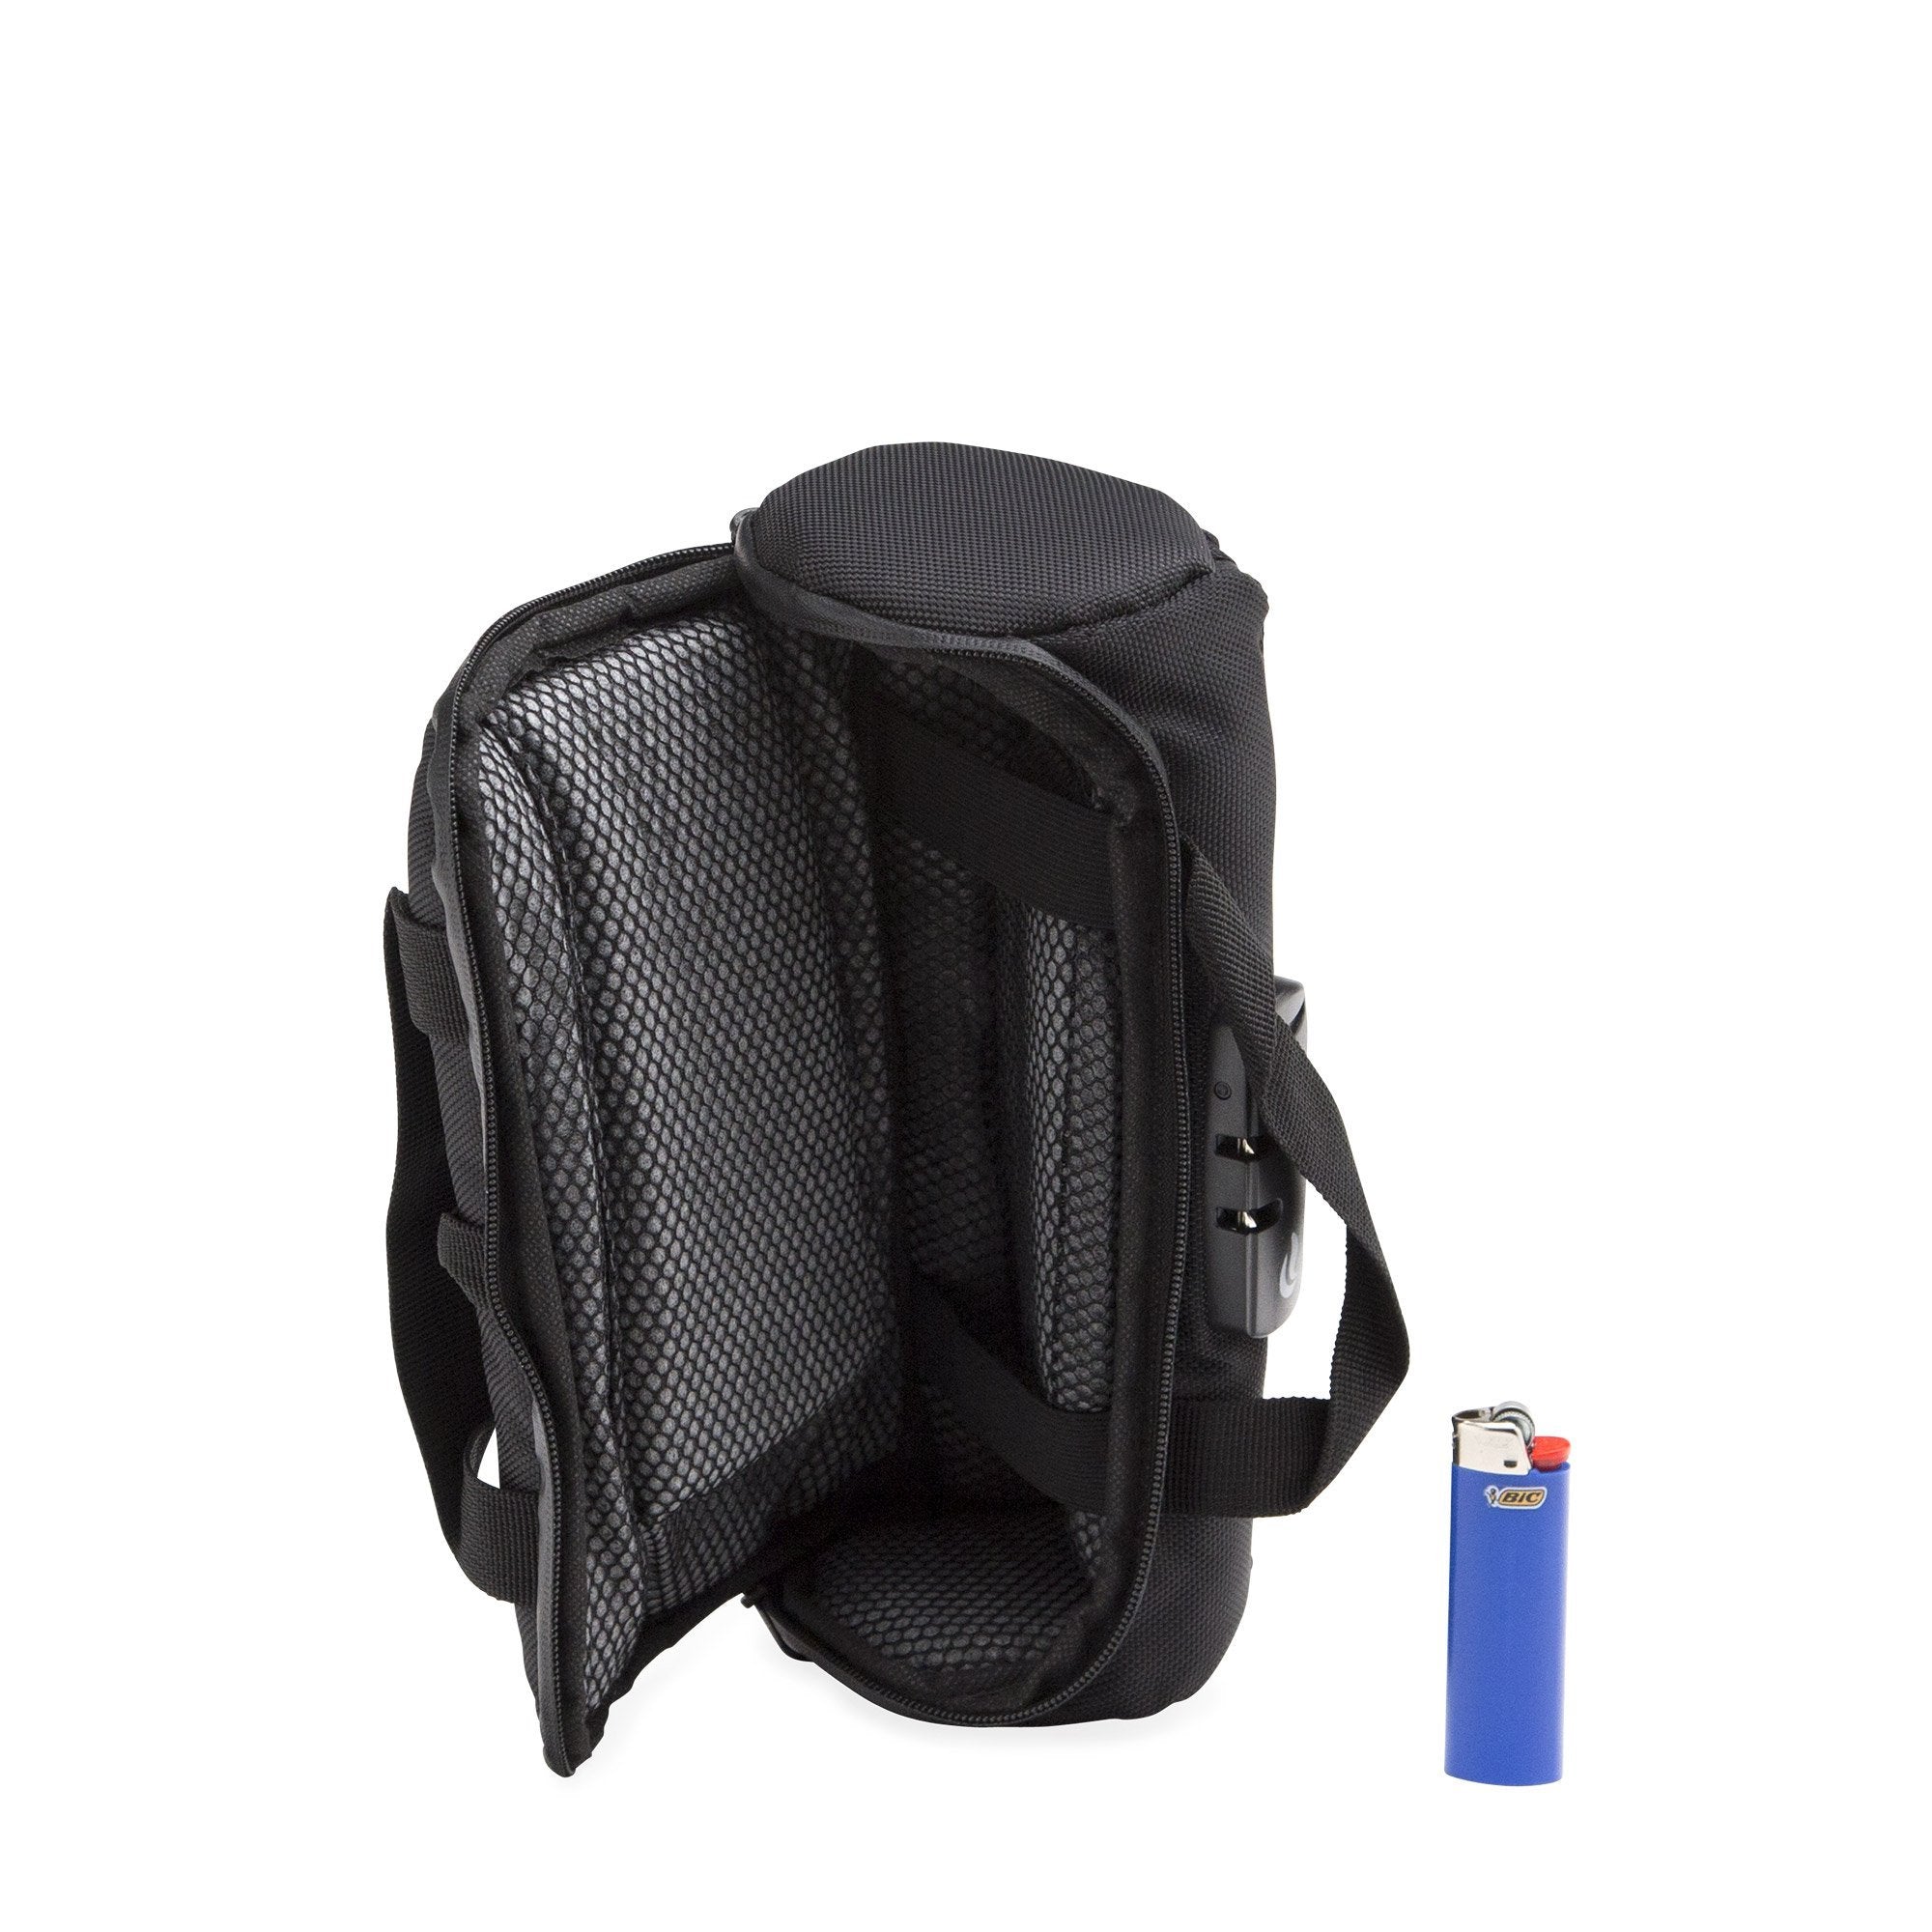 Skunk Smell Proof Combo Lock Urban Backpack / $ 84.99 at 420 Science